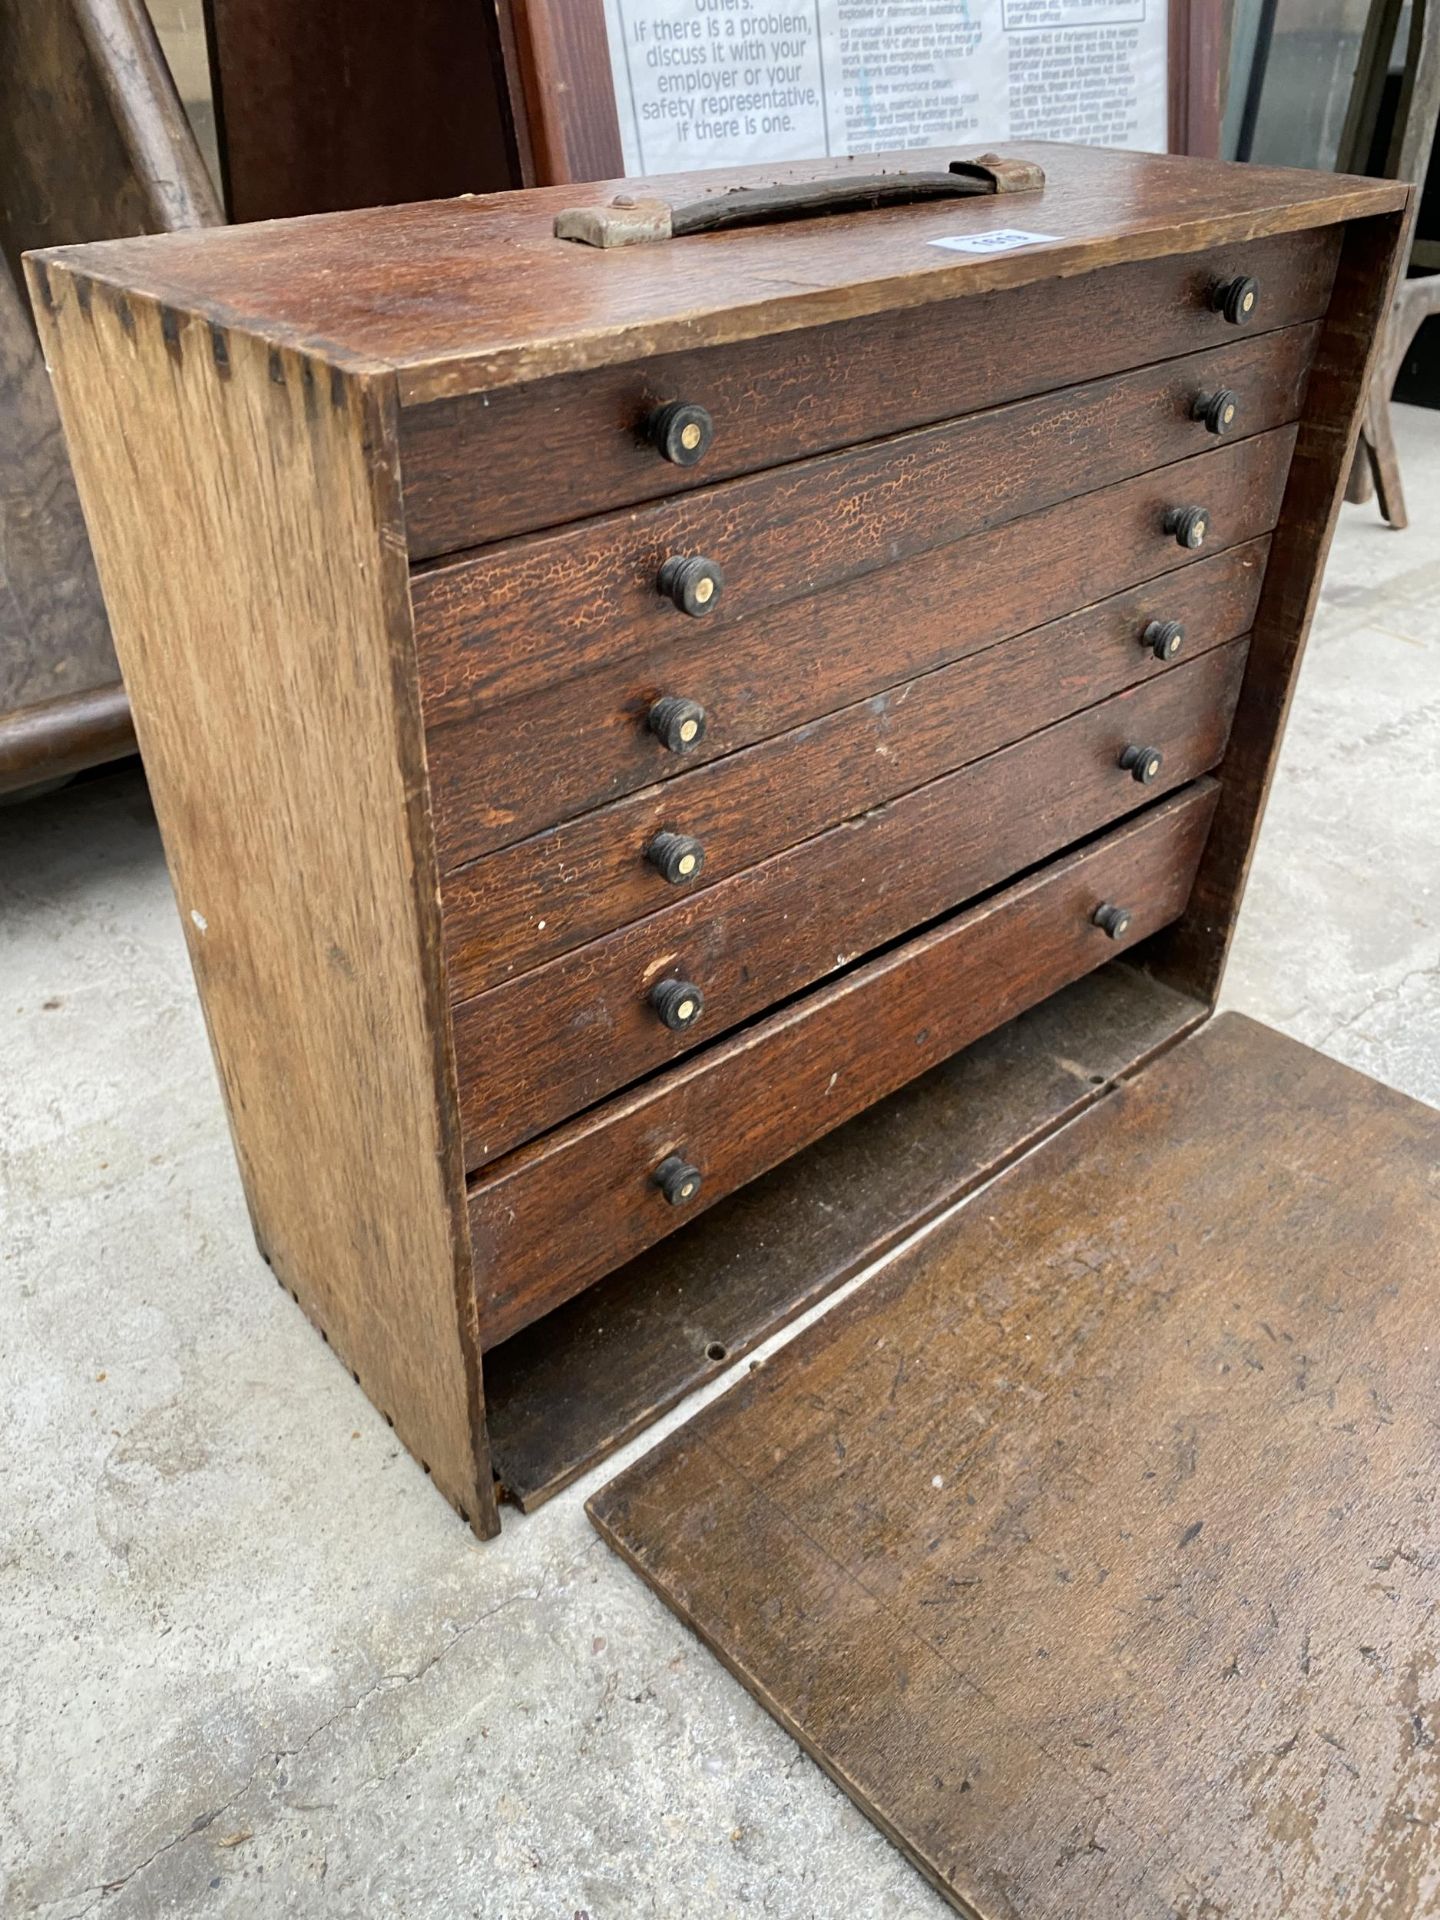 A VINTAGE SIX DRAWER WOODEN ENGINEERS CHEST - Image 2 of 6